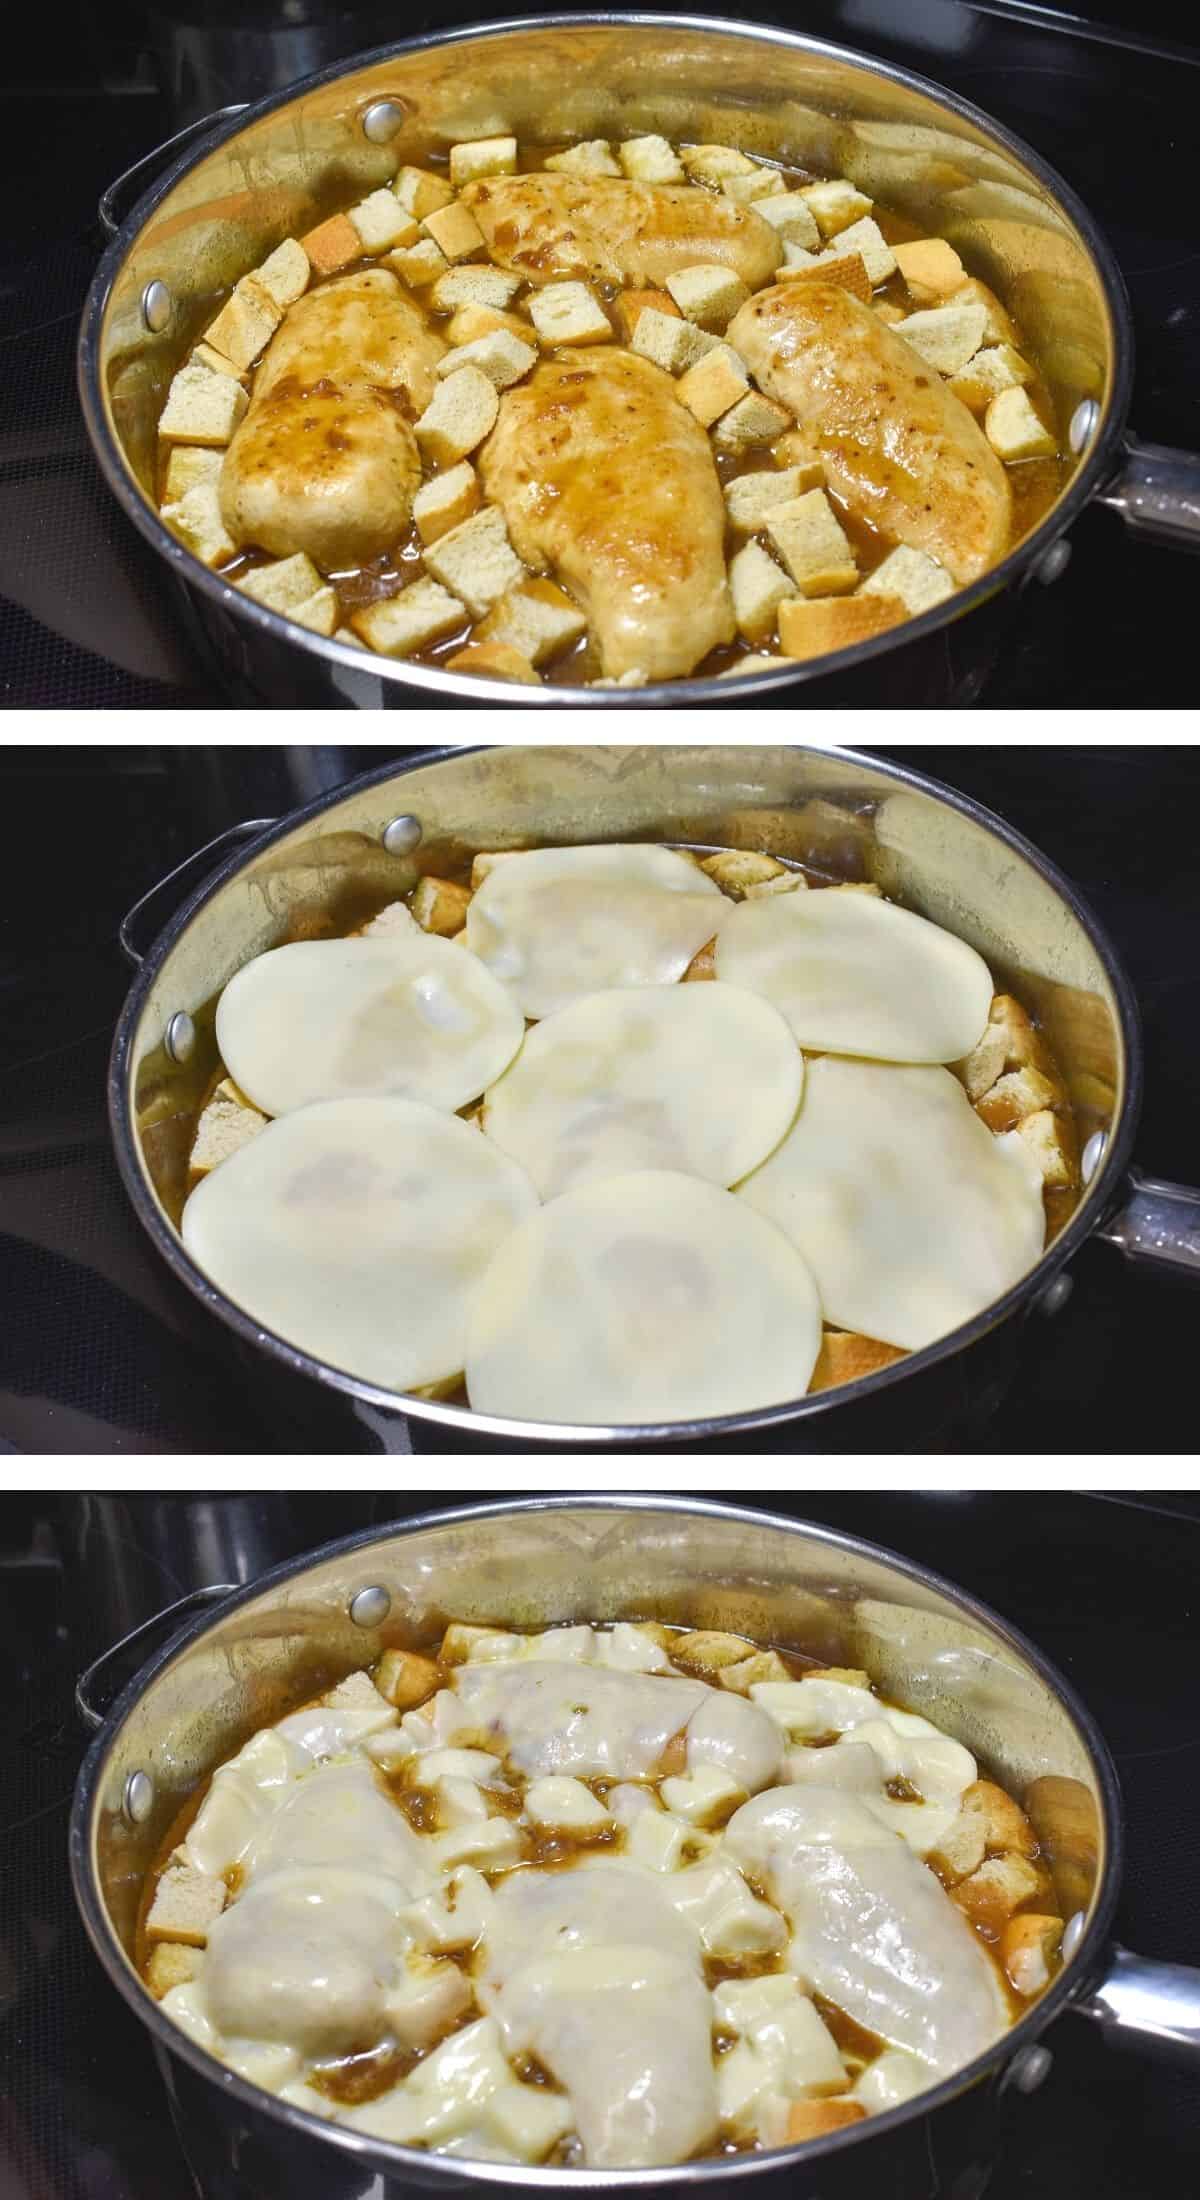 A collage of three images showing the chicken in the skillet with the bread cubes and the cheese melted on top.